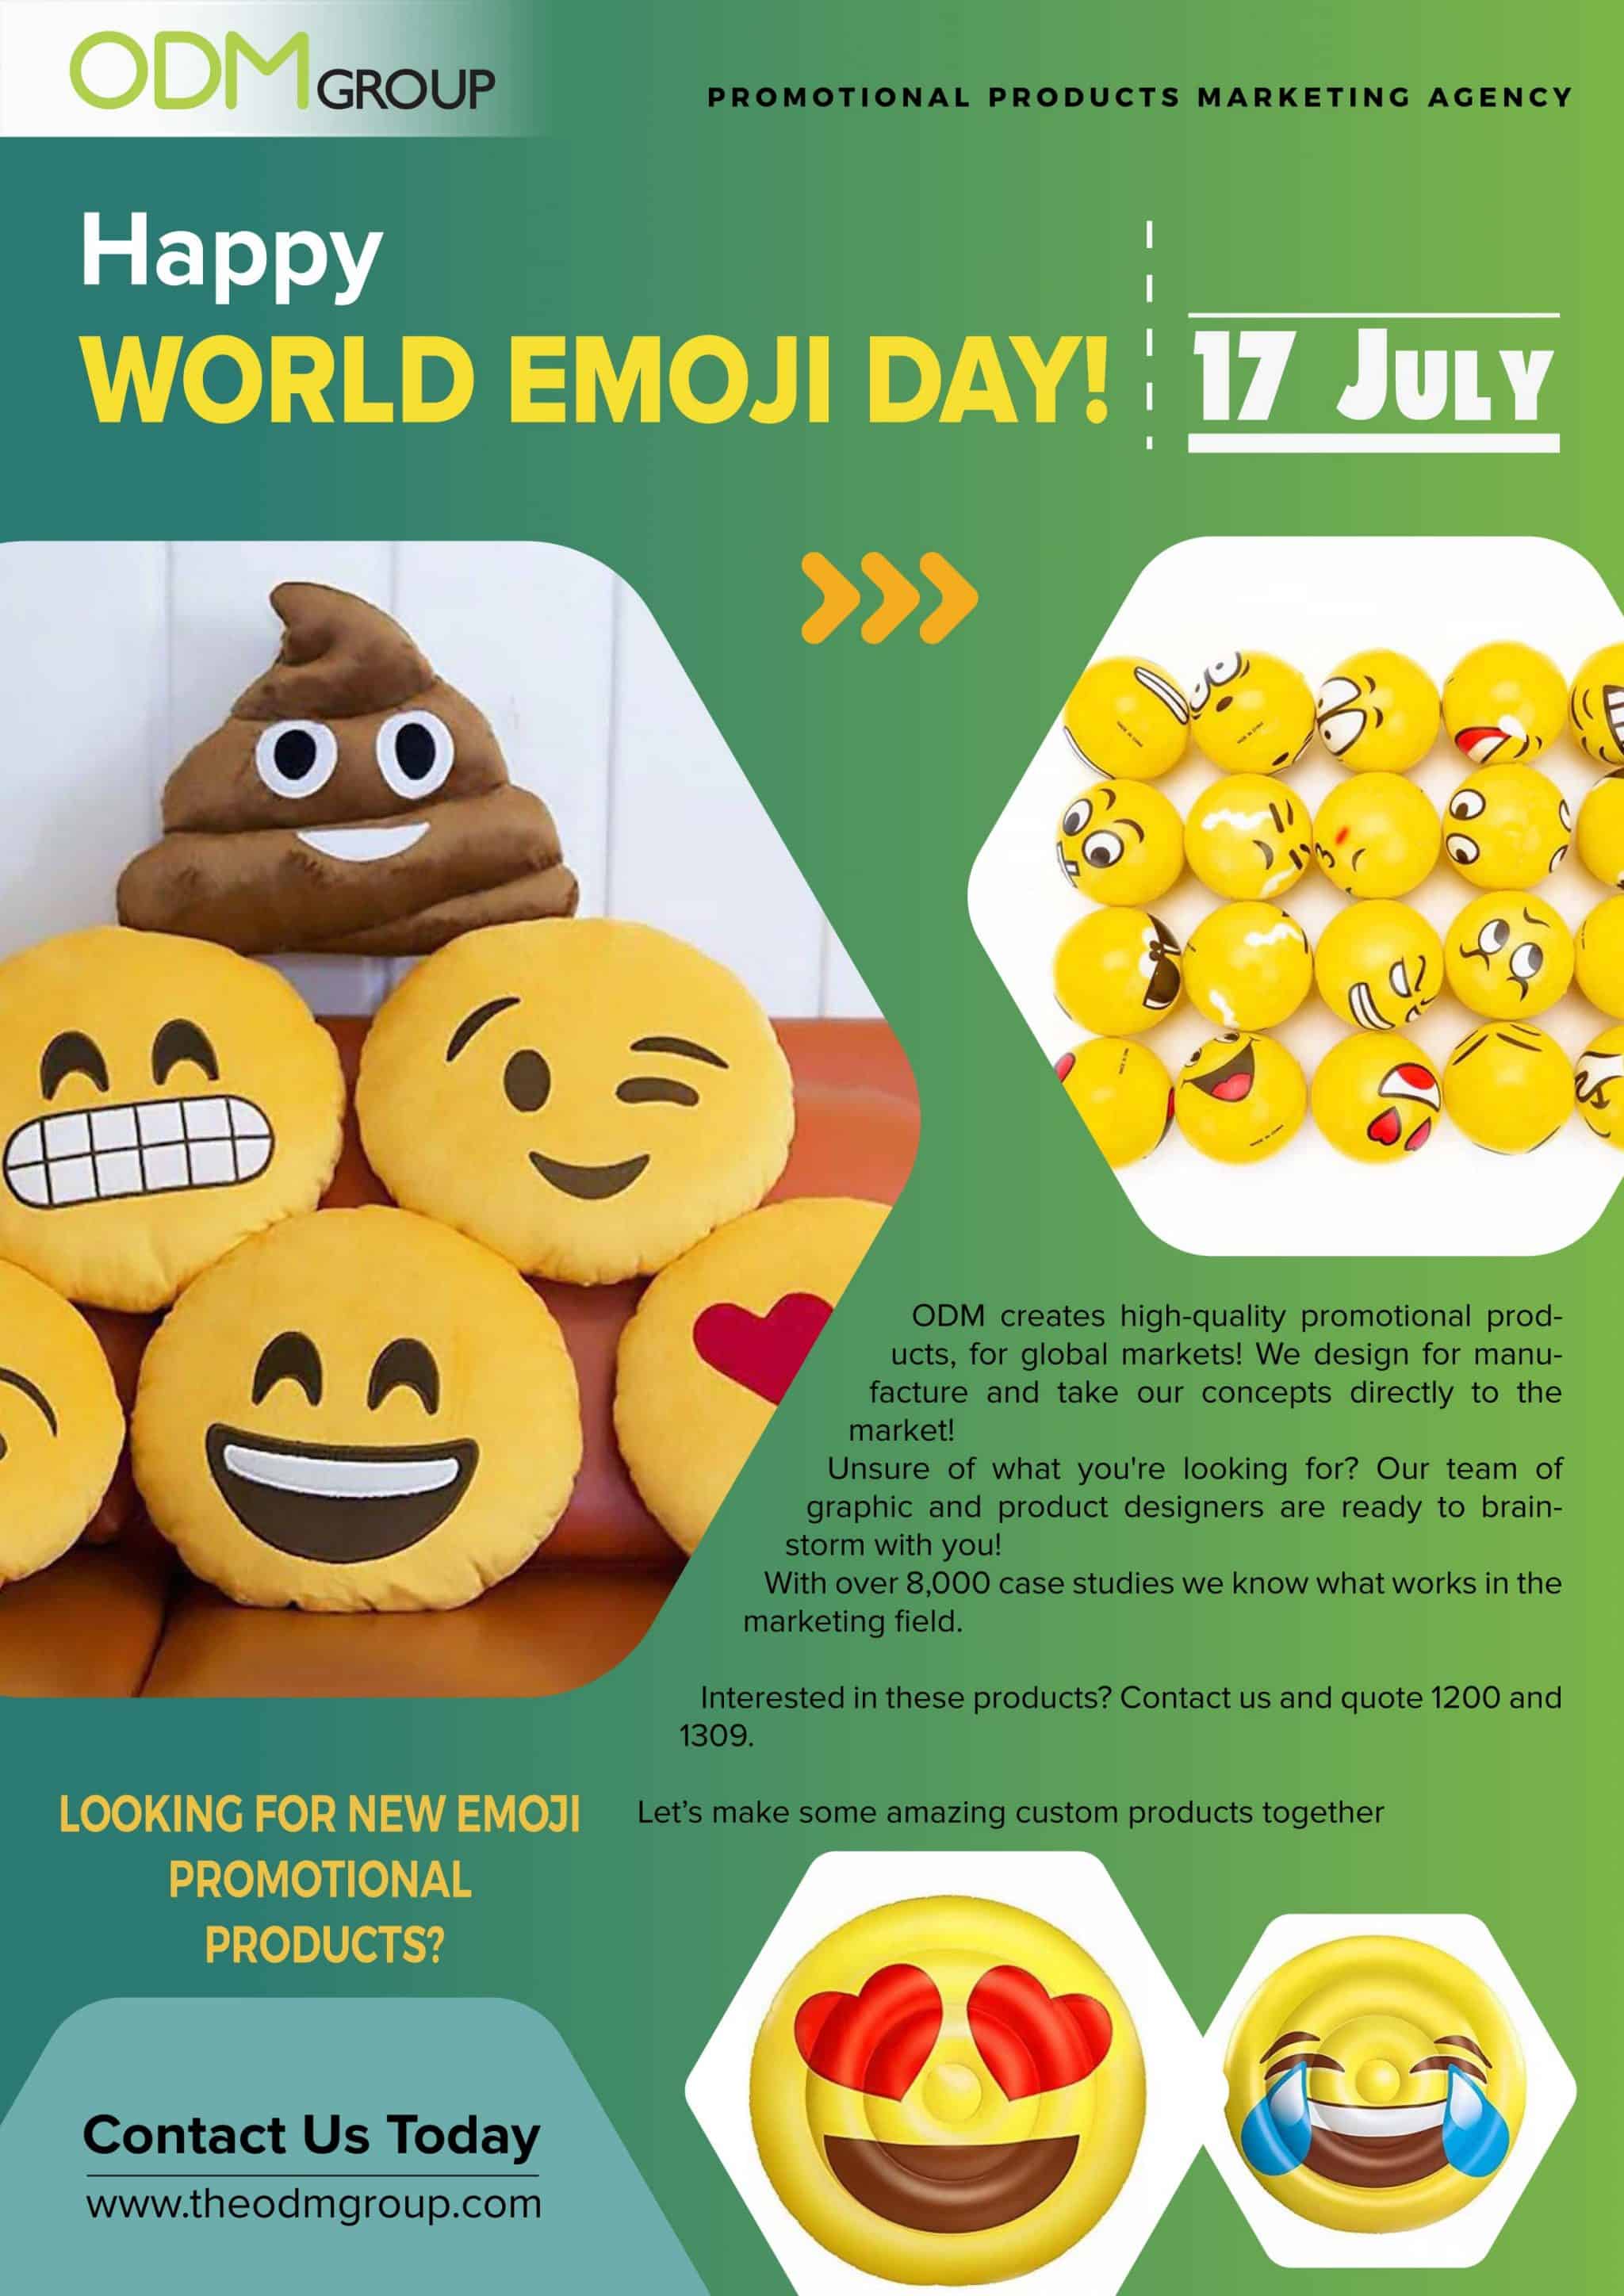 Here Are Some Branded Merchandise Ideas For World Emoji Day